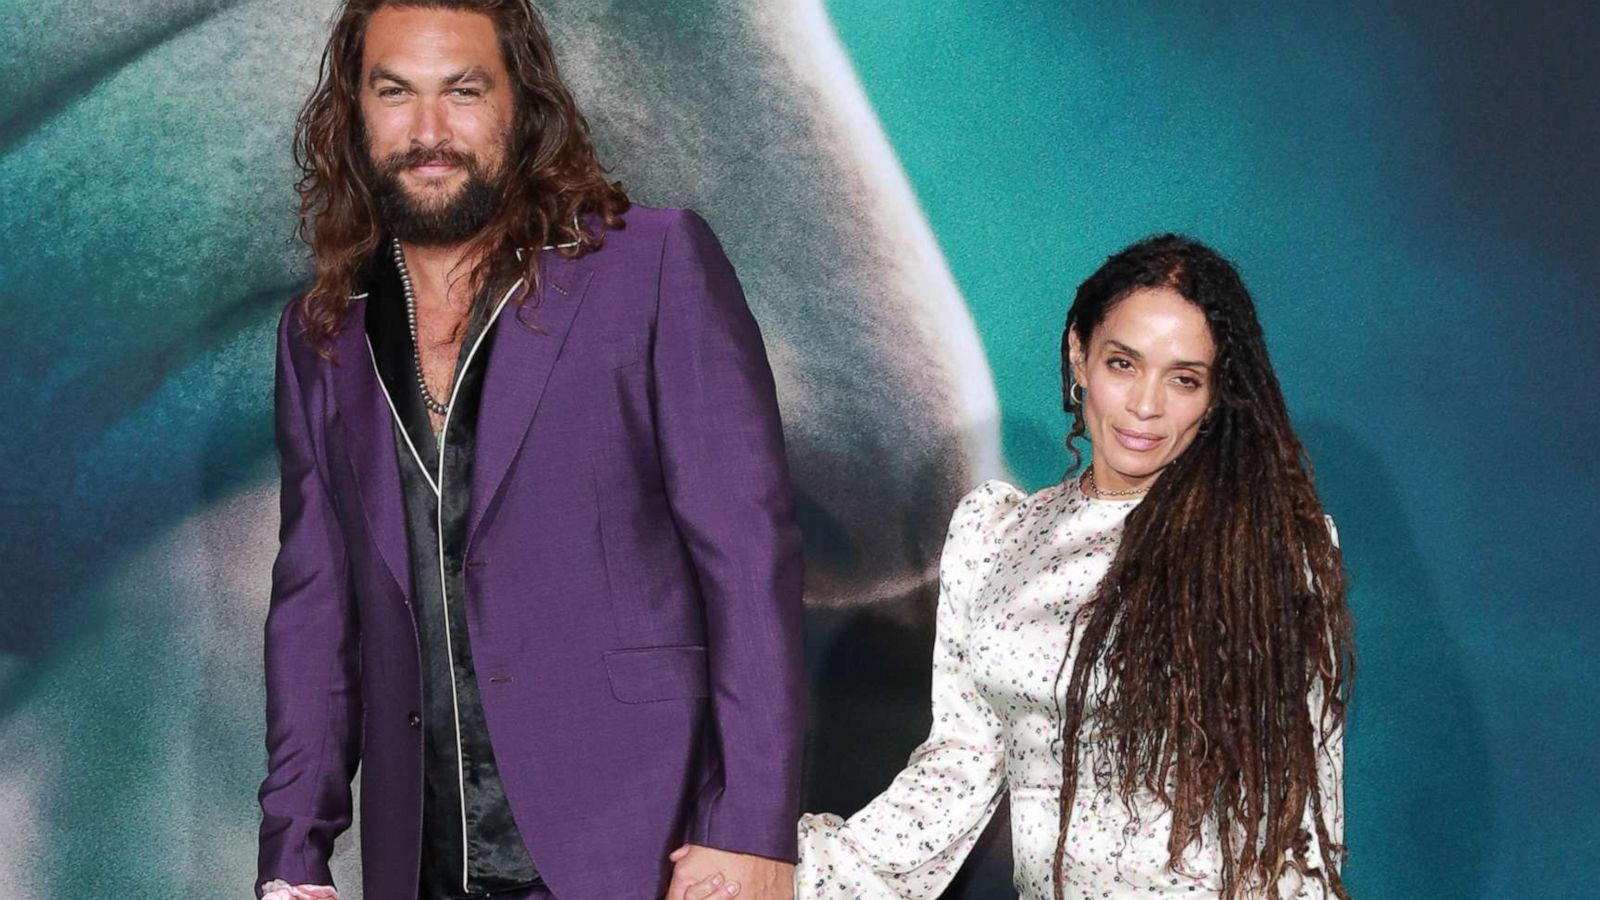 Jason Momoa says marrying his 'childhood crush' Lisa Bonet made him believe  'anything is possible' - ABC News